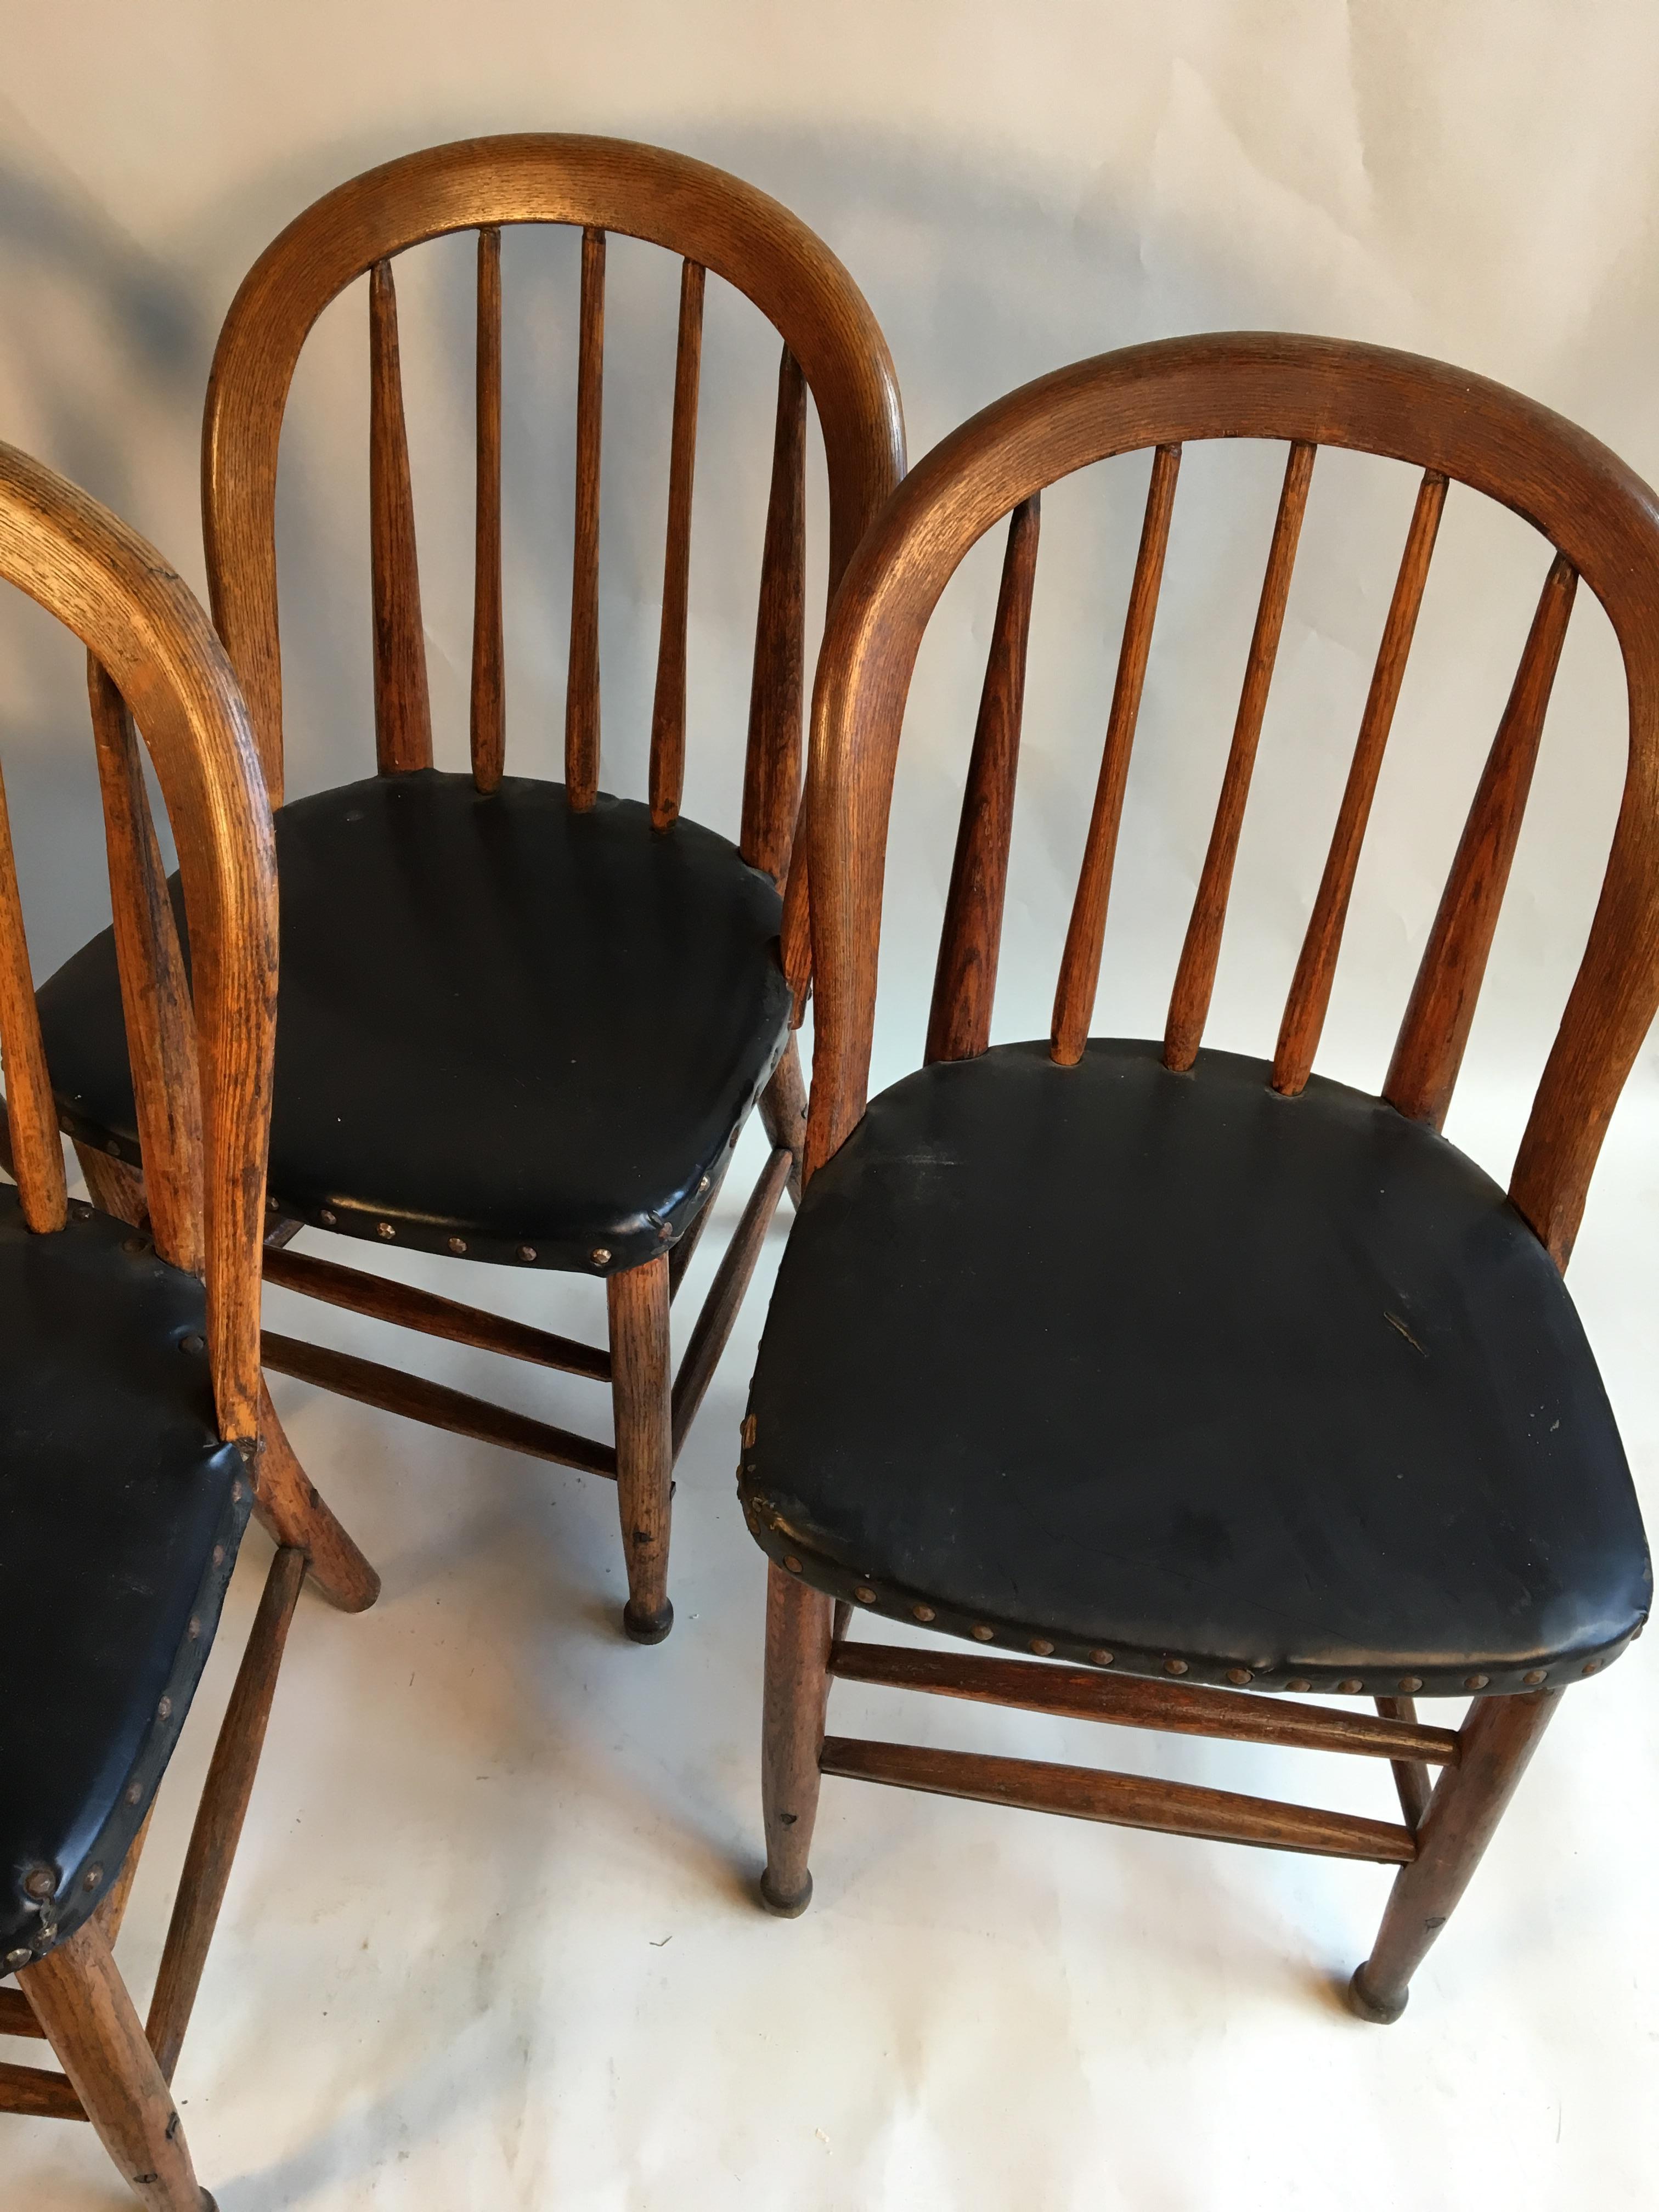 Country Set of 4 Oak Barrel-Back Chairs, circa 1880